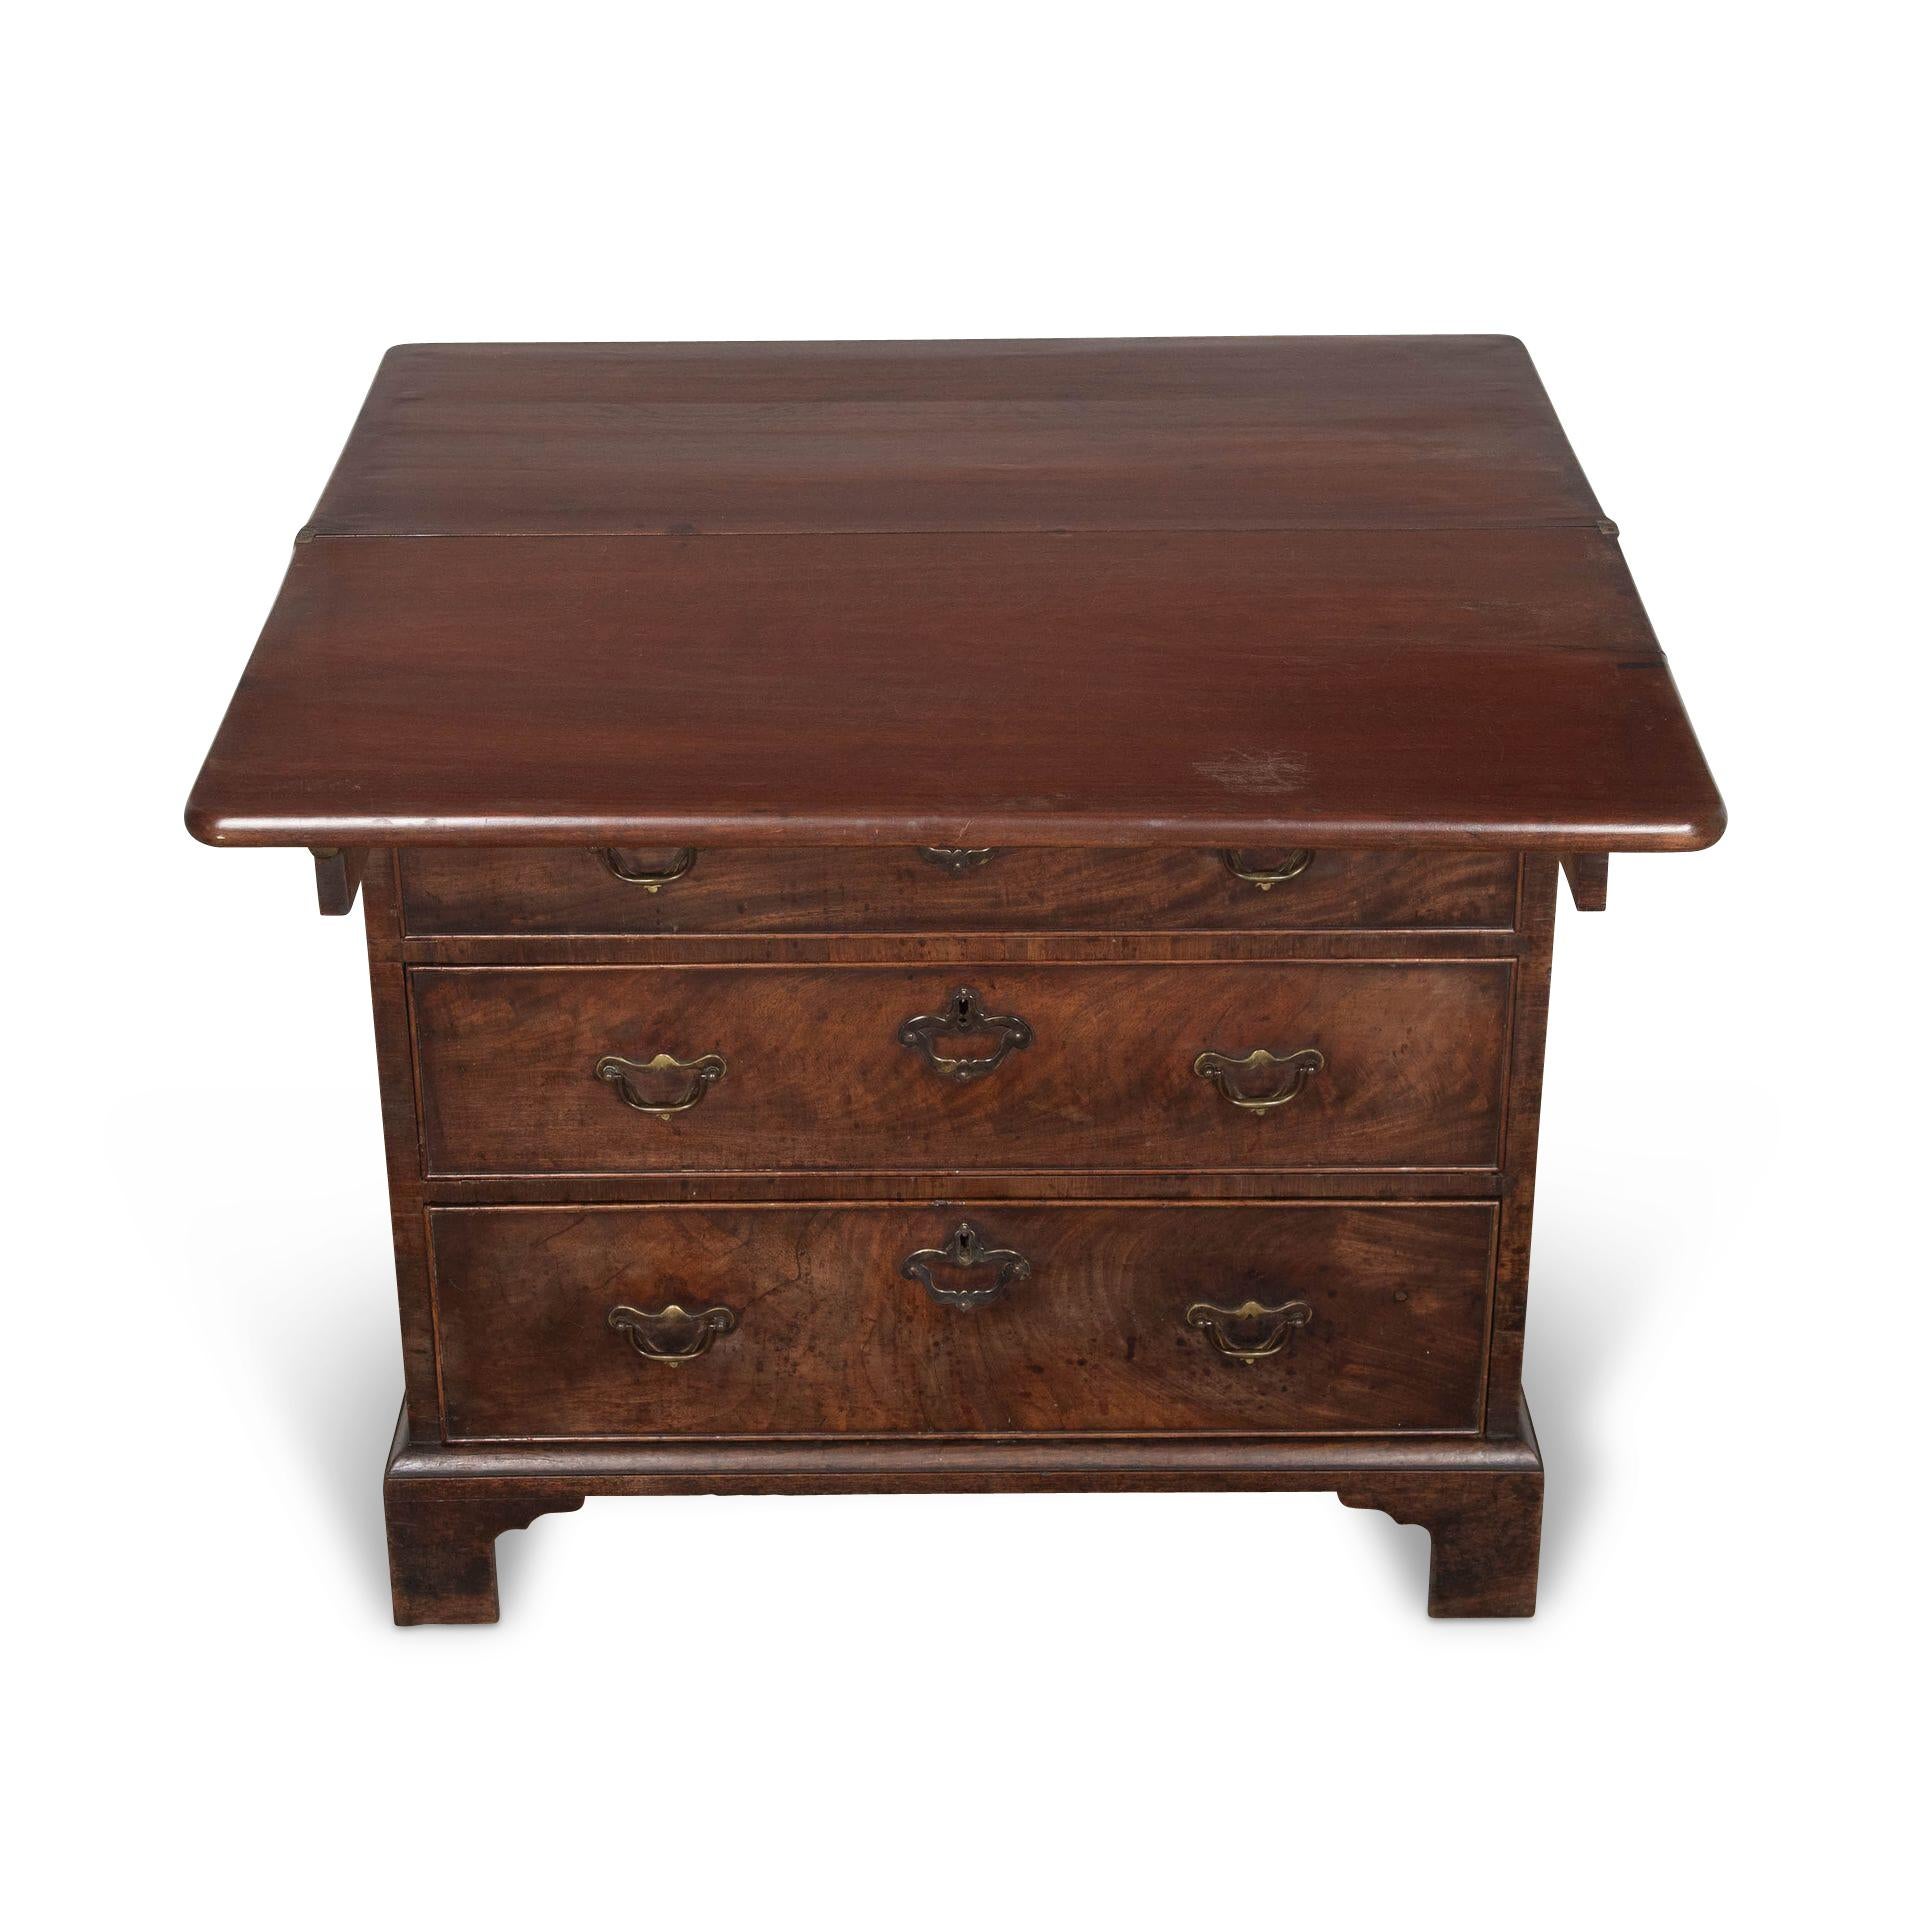 Rare 18th Century Mahogany bachelors Chest In Good Condition For Sale In Shipston-On-Stour, GB